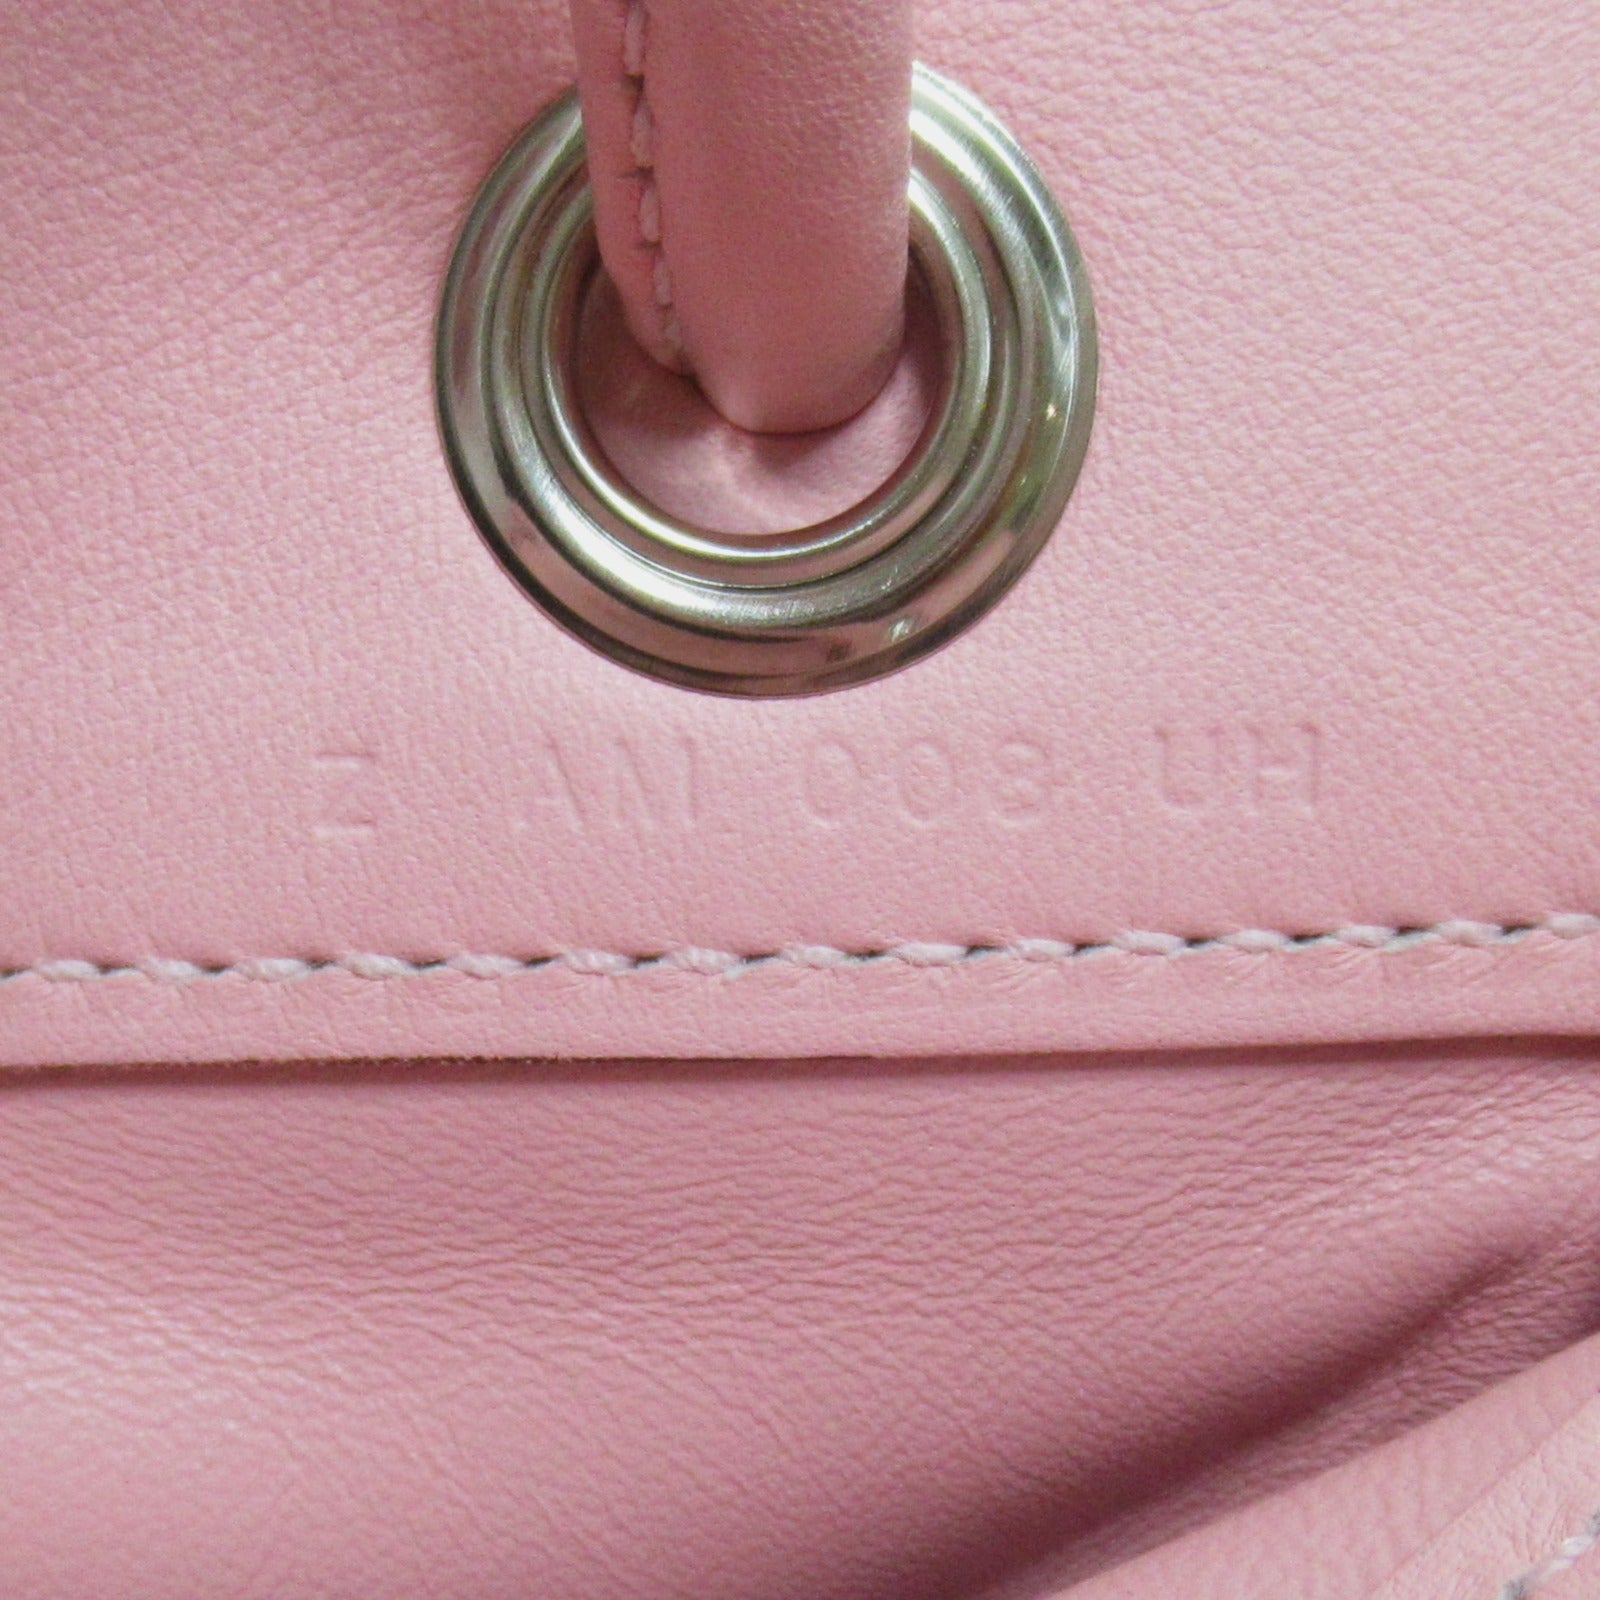 Hermes Hermes Alineumini Rose Sacca Tote Bag  Bag Leather   Pink Collection